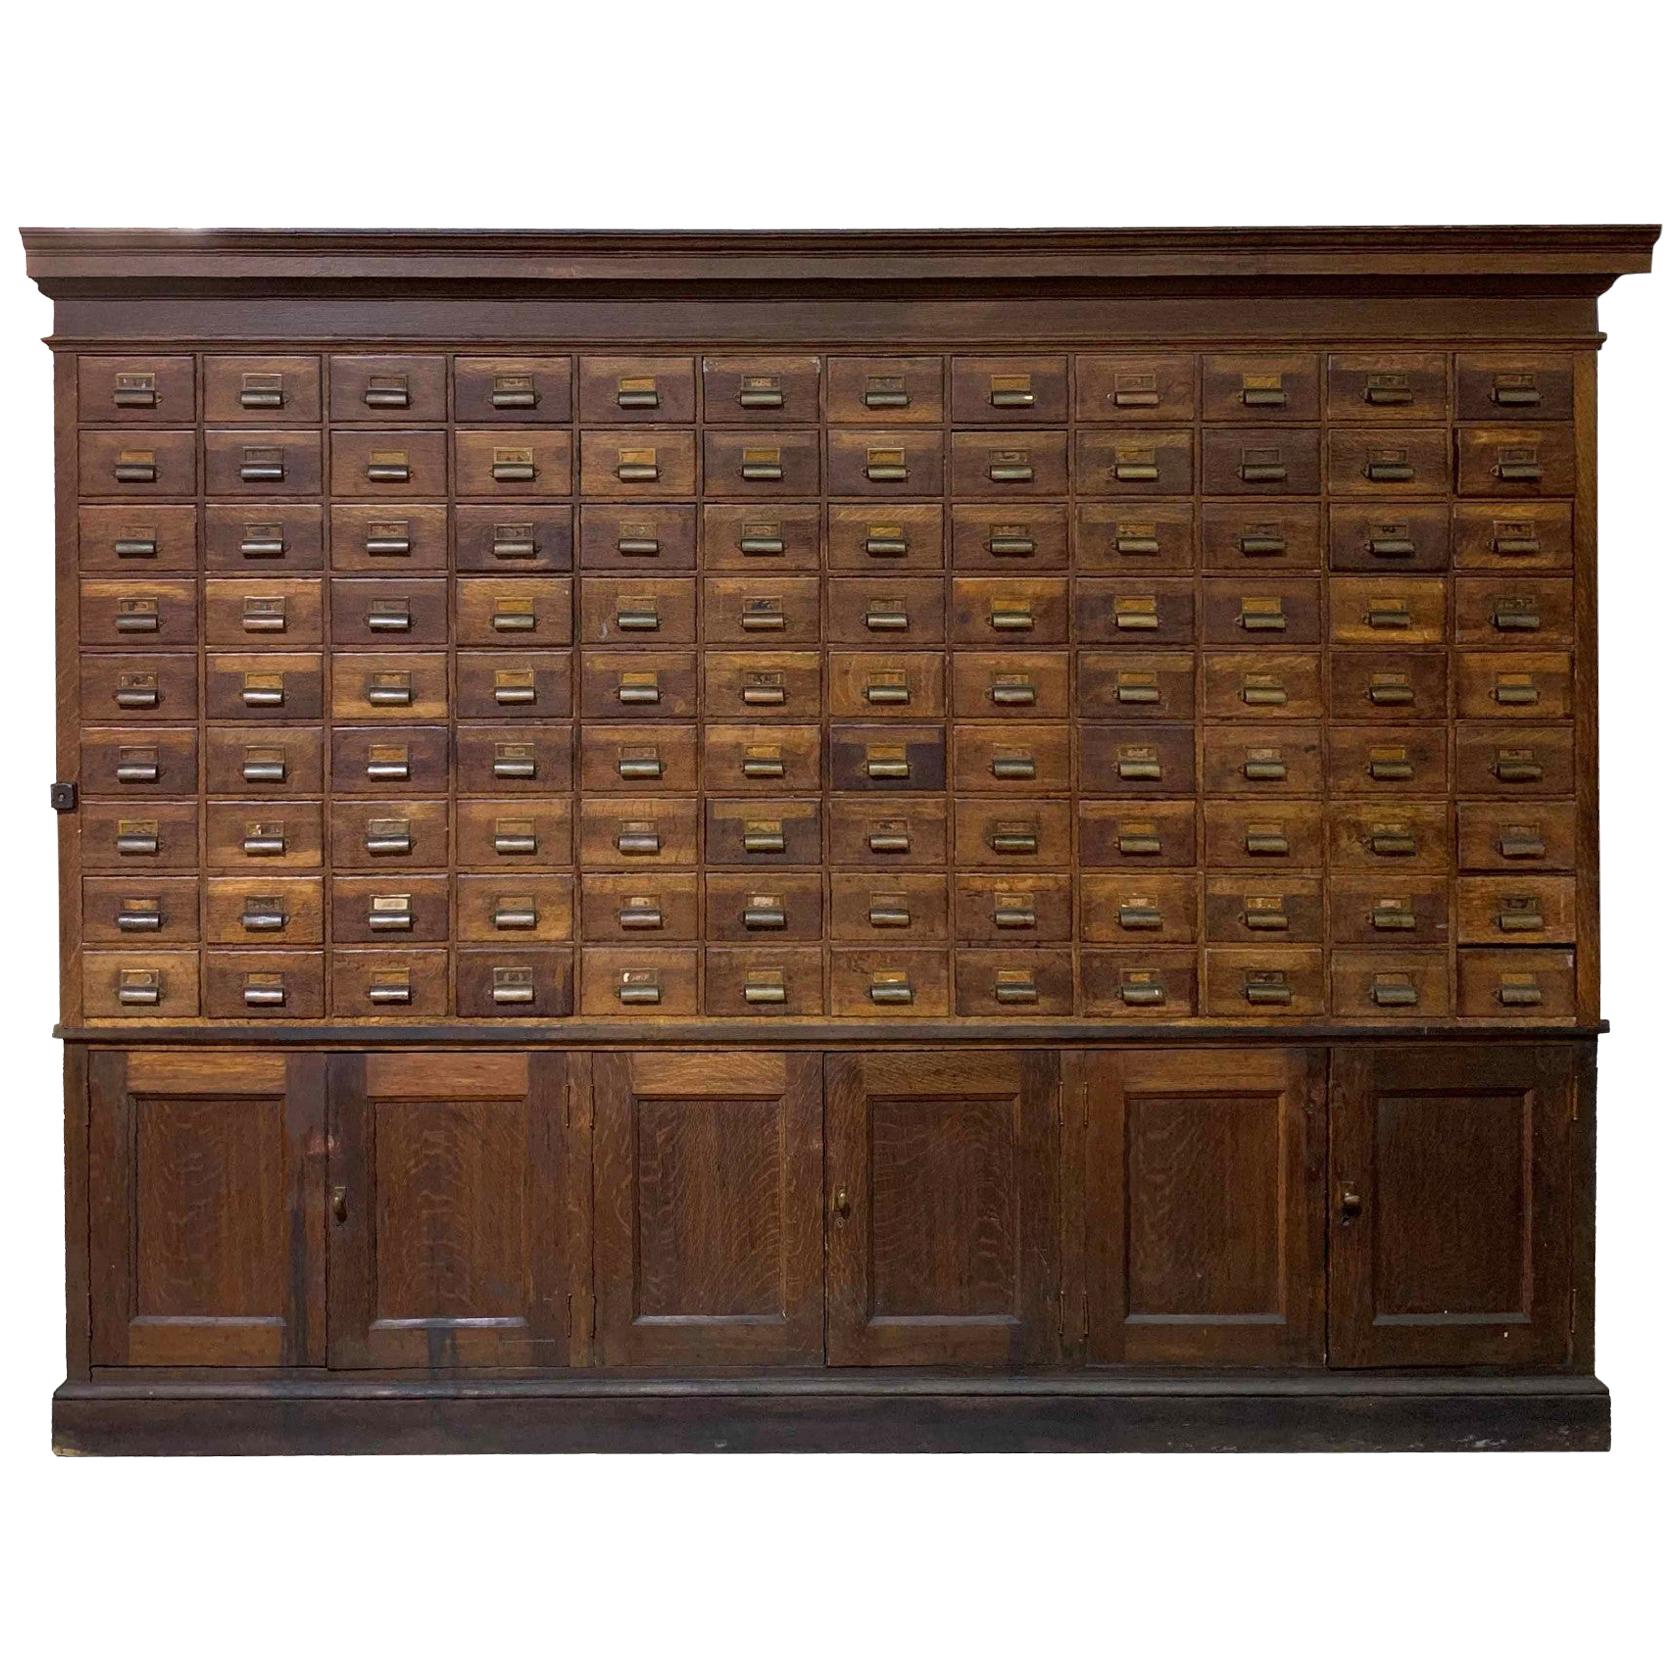 Late 1800s Wood Cabinet Apothecary Card Catalog with Drawers and Shelves